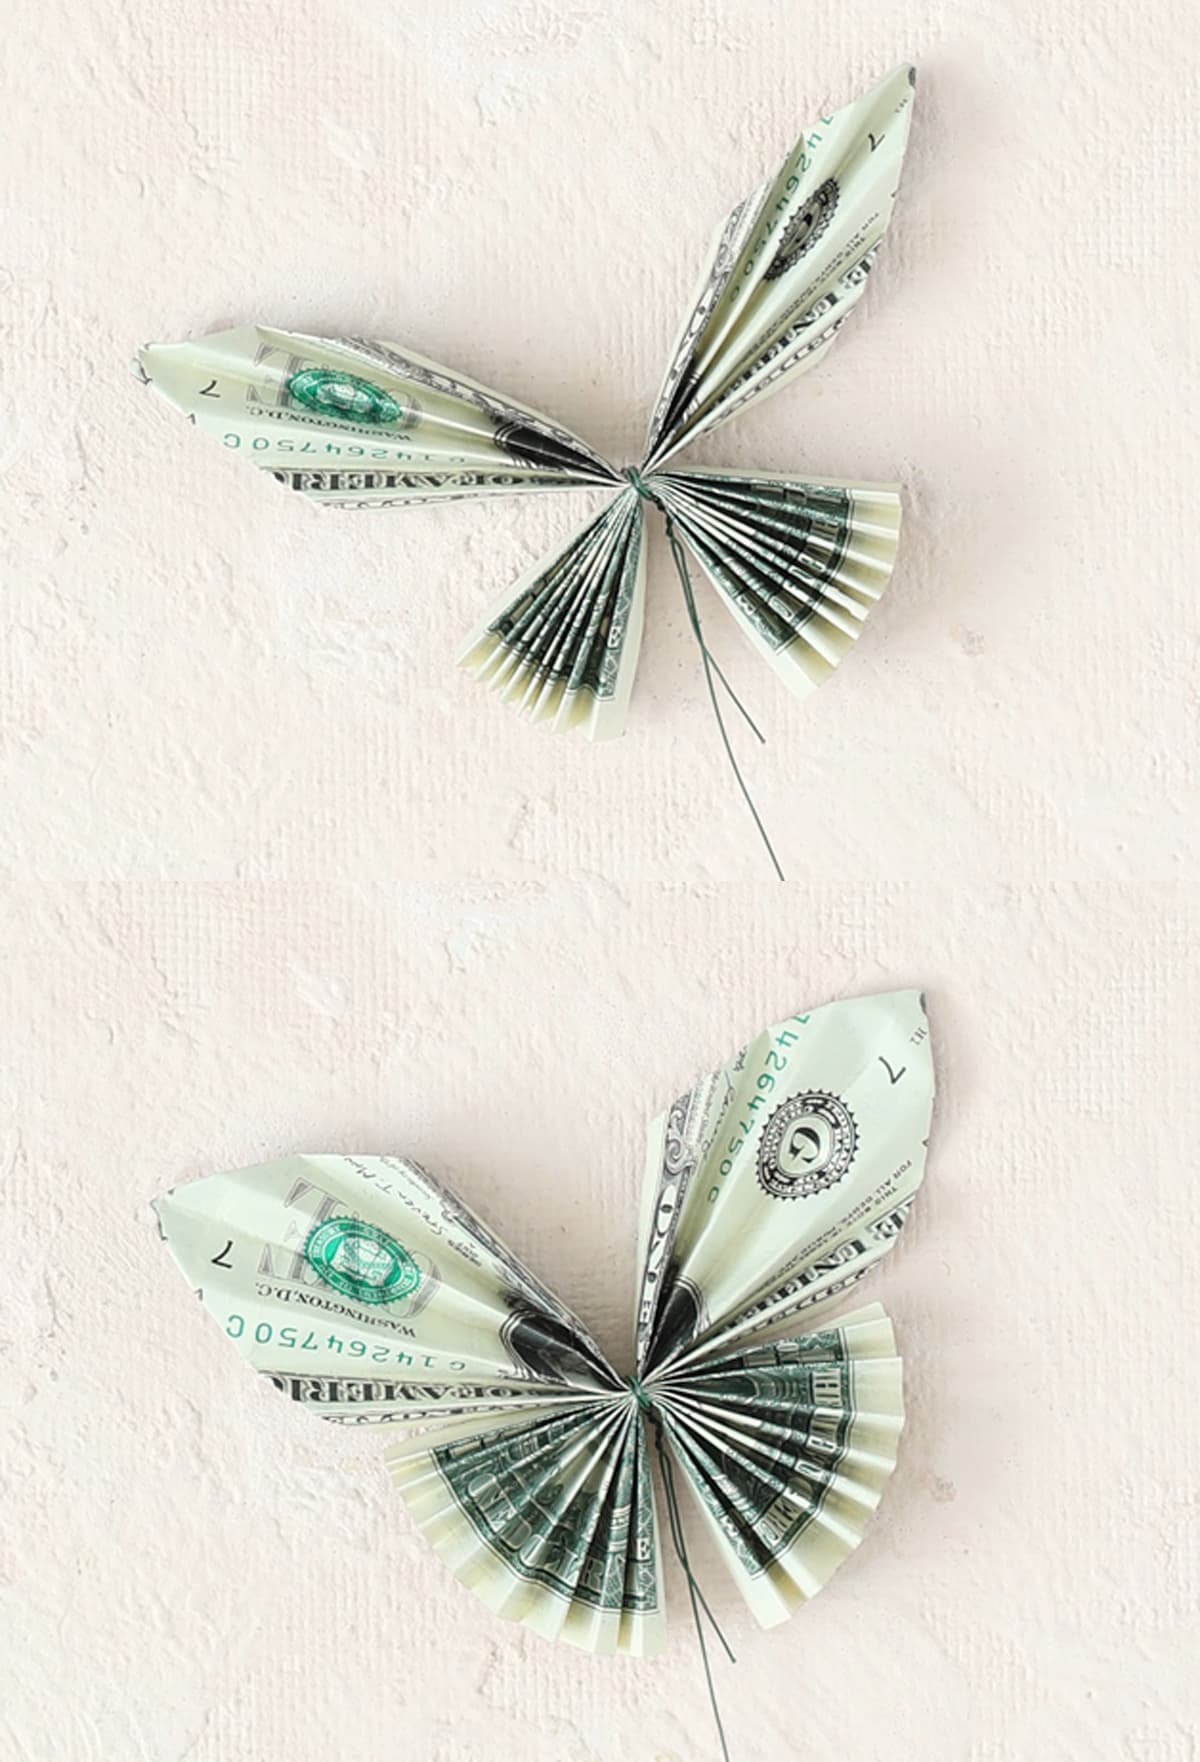 fluff the wings of the money butterfly